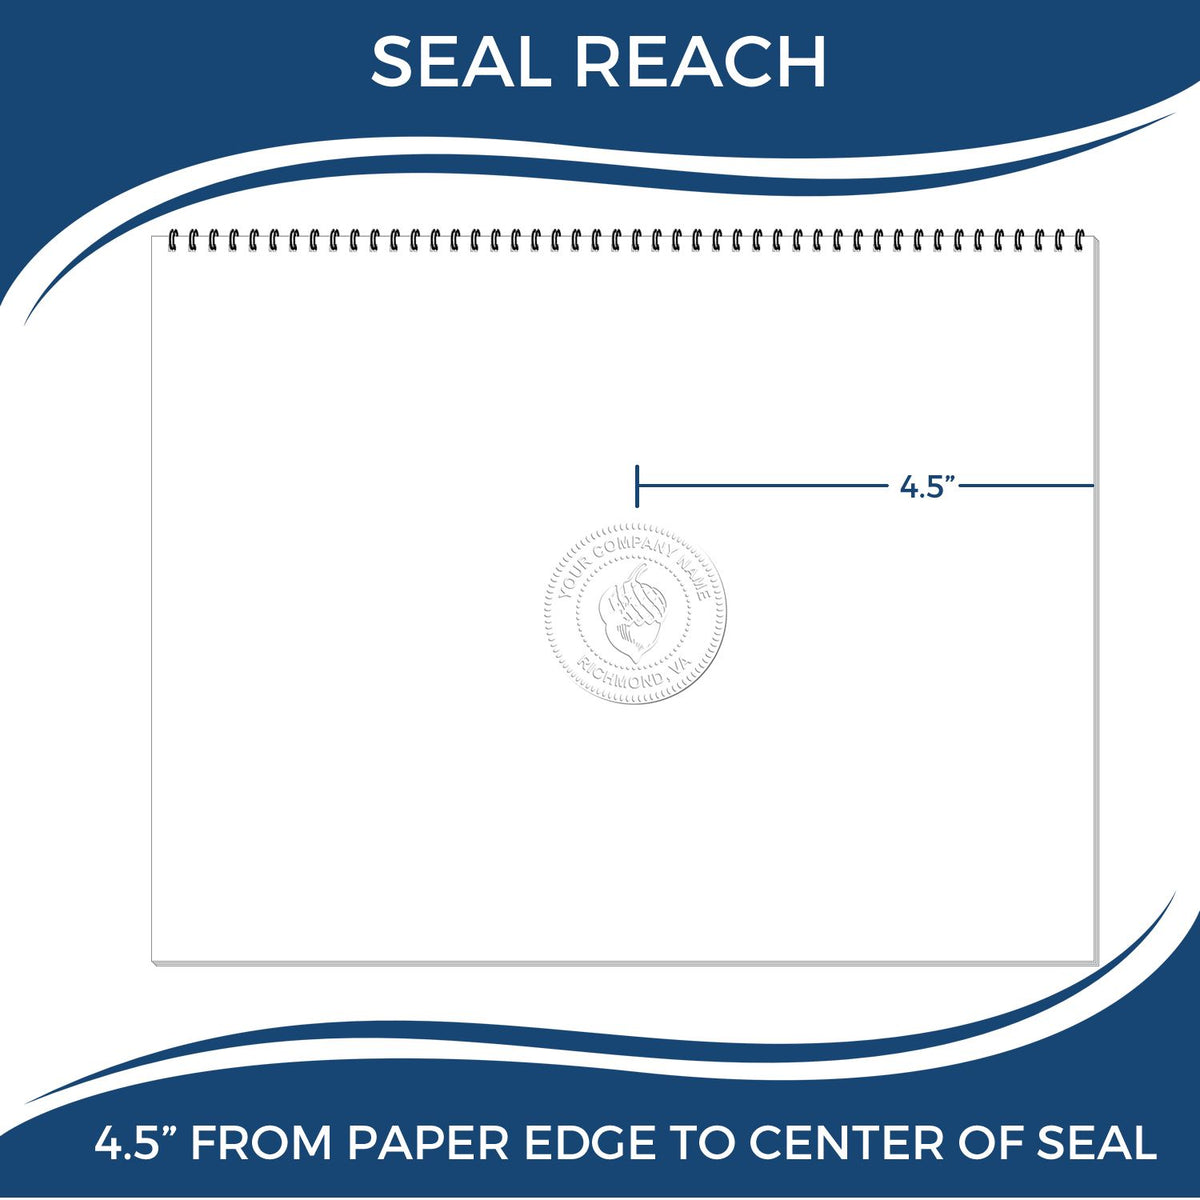 An infographic showing the seal reach which is represented by a ruler and a miniature seal image of the Extended Long Reach Hawaii Architect Seal Embosser